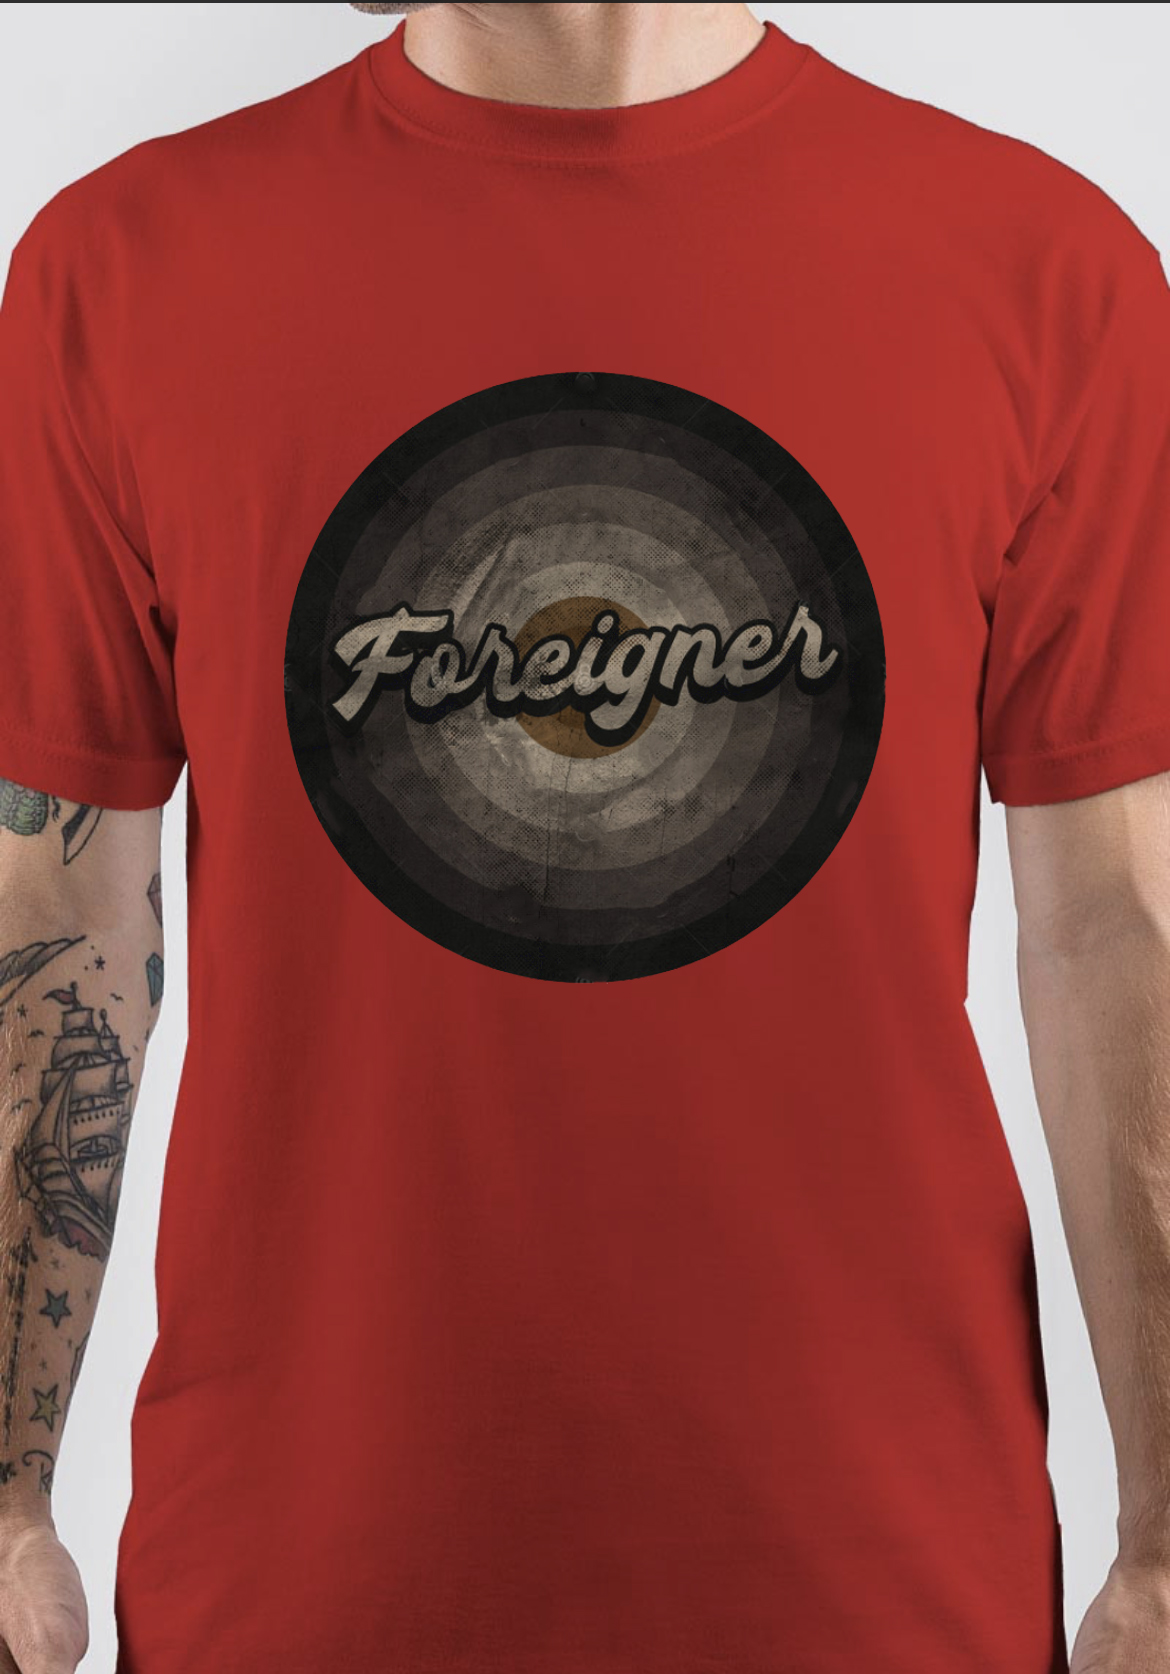 Foreigner T-Shirt And Merchandise